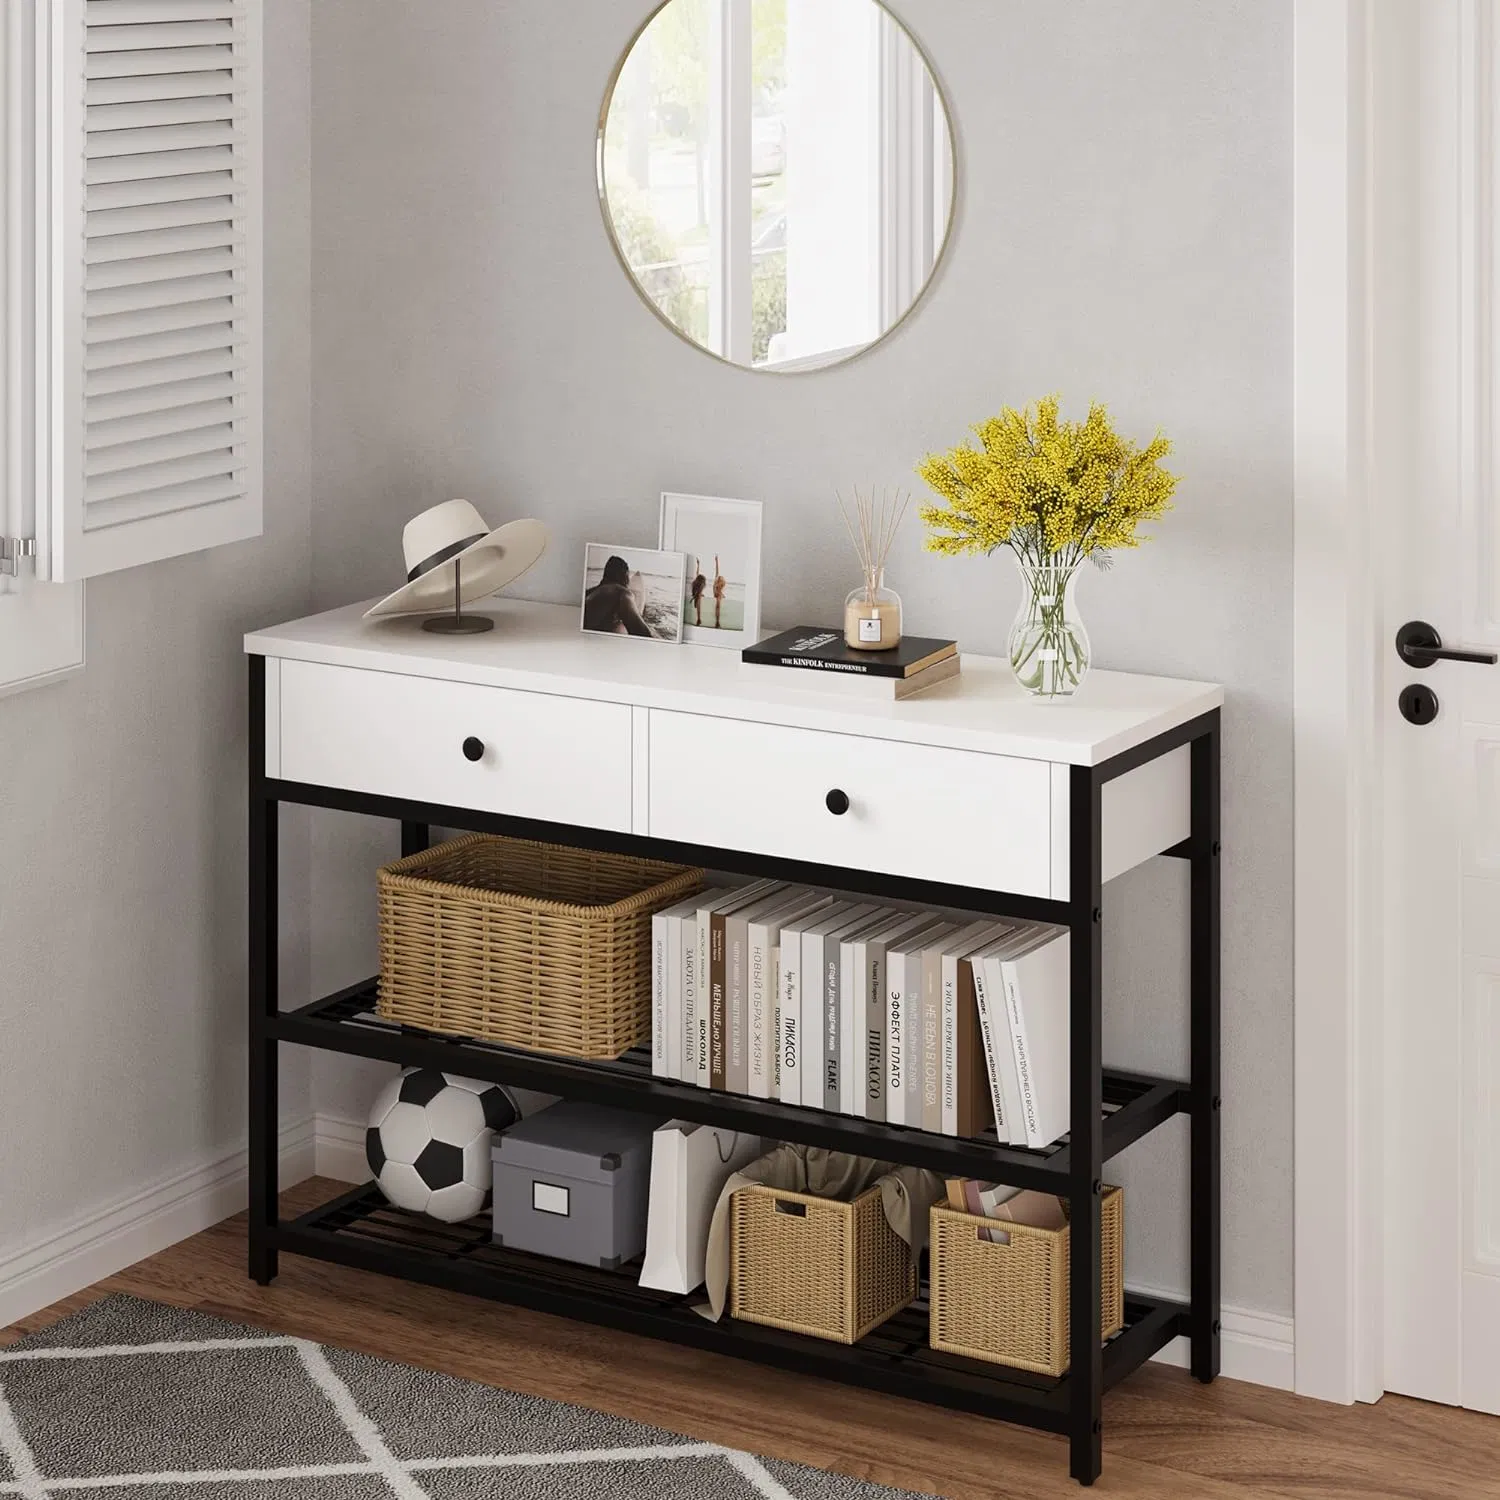 Sideboard Cabinet with Open Book Shelf for Bedroom